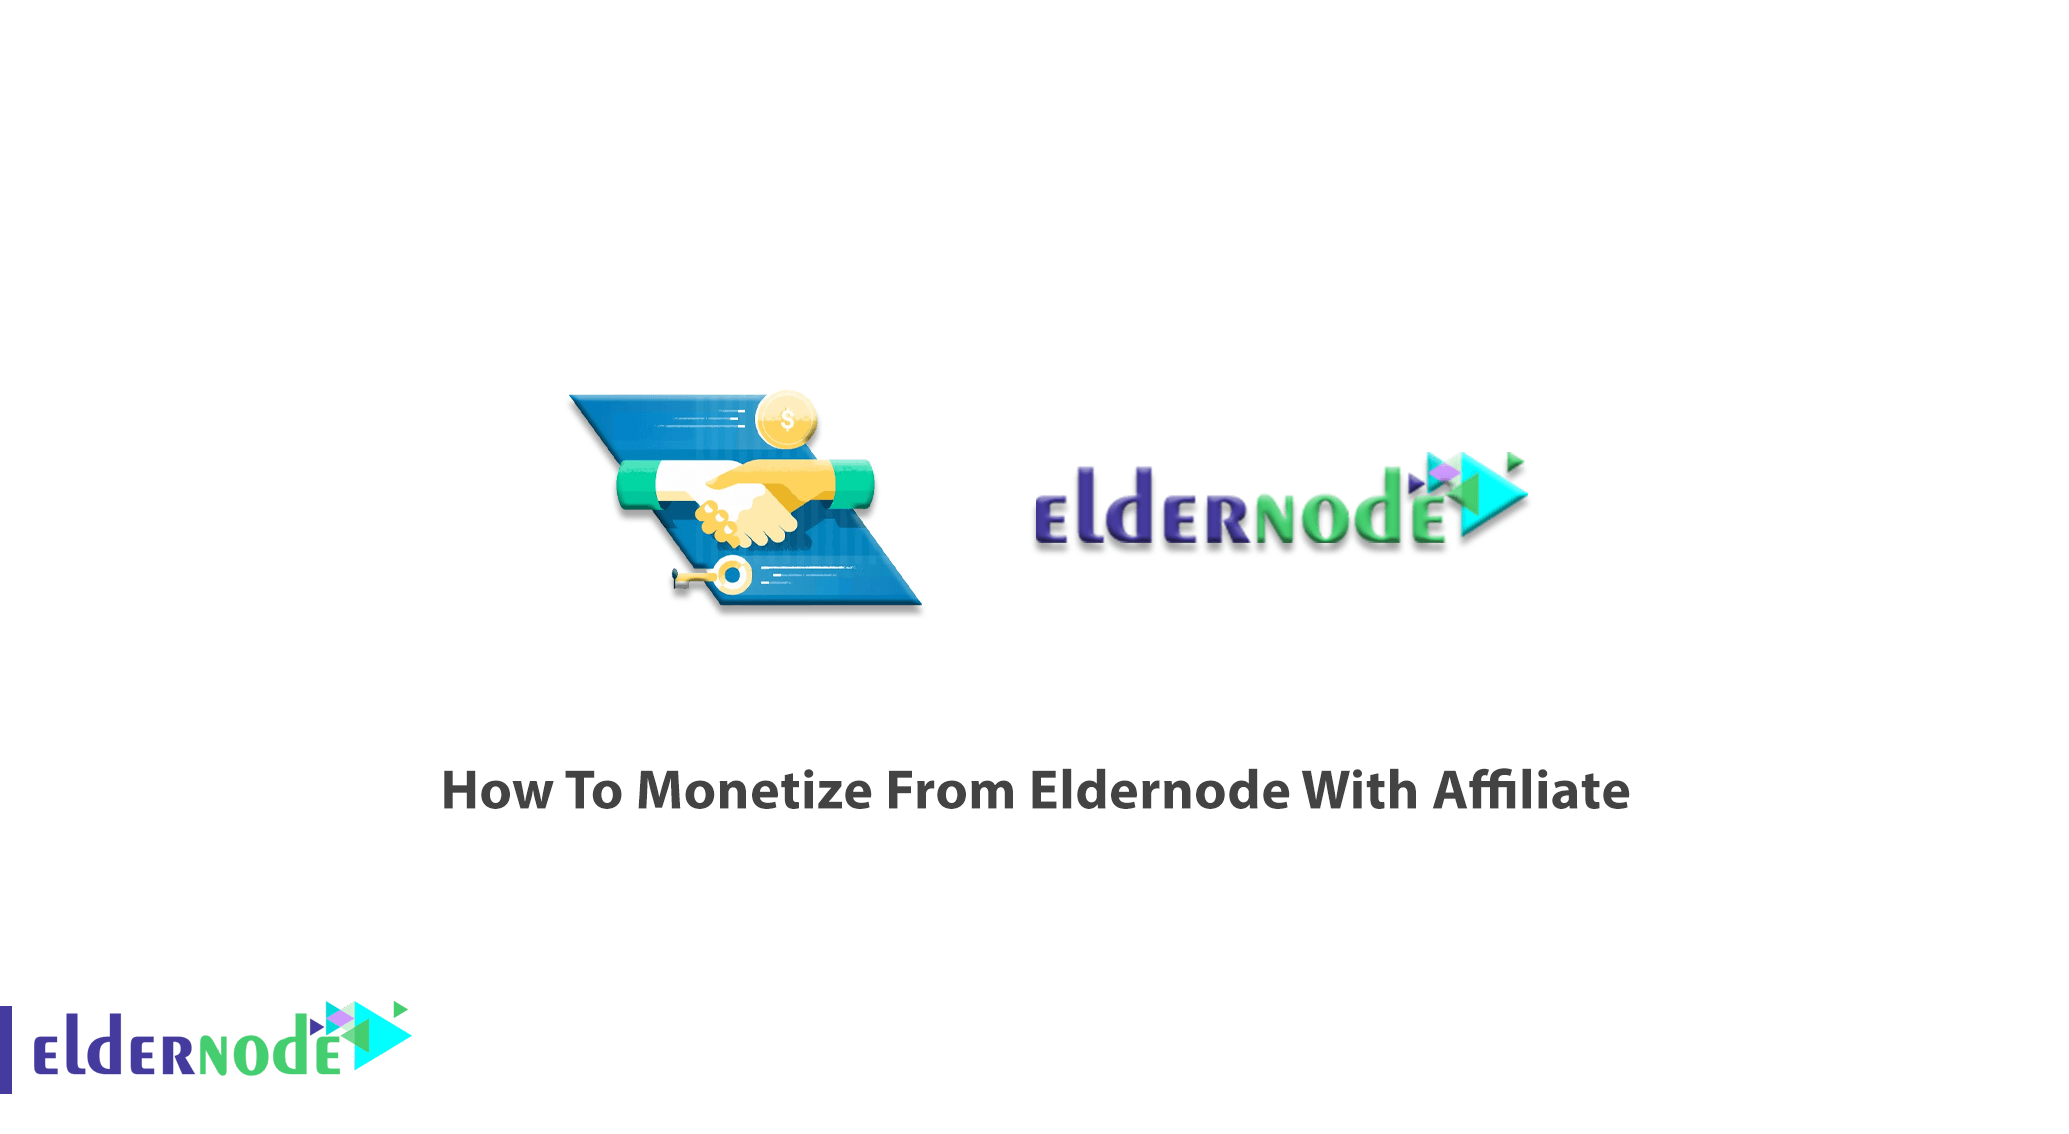 How To Monetize From Eldernode With Affiliate